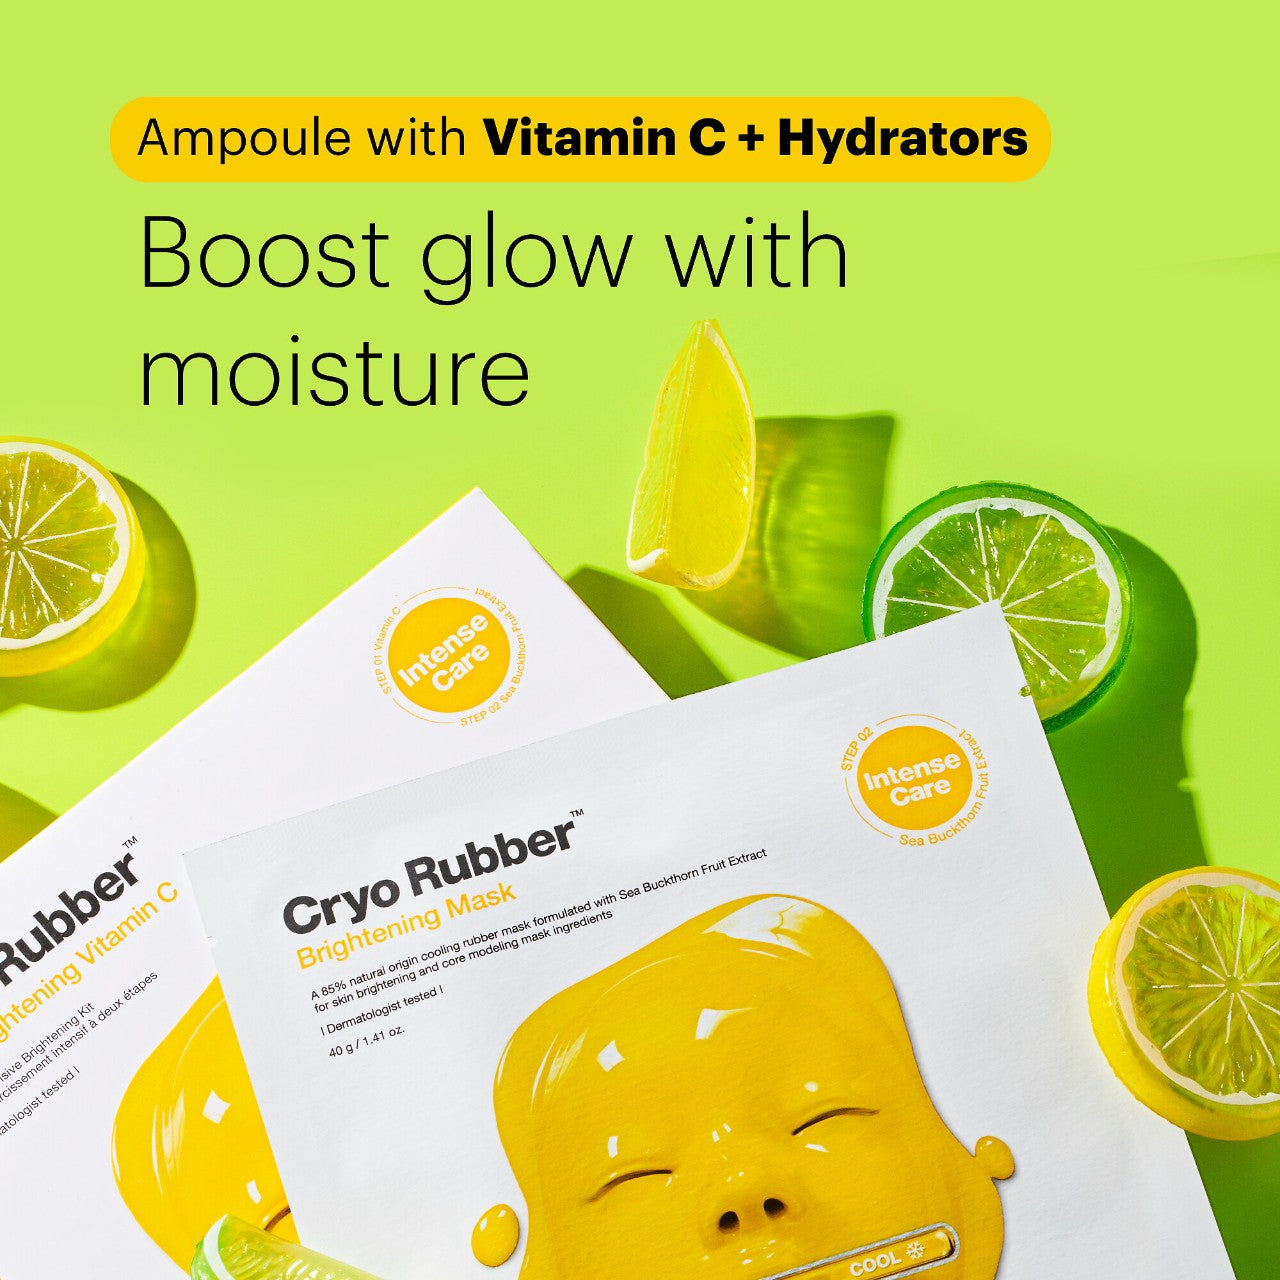 Cryo Rubber Mask with Brightening Vitamin C Ampoule